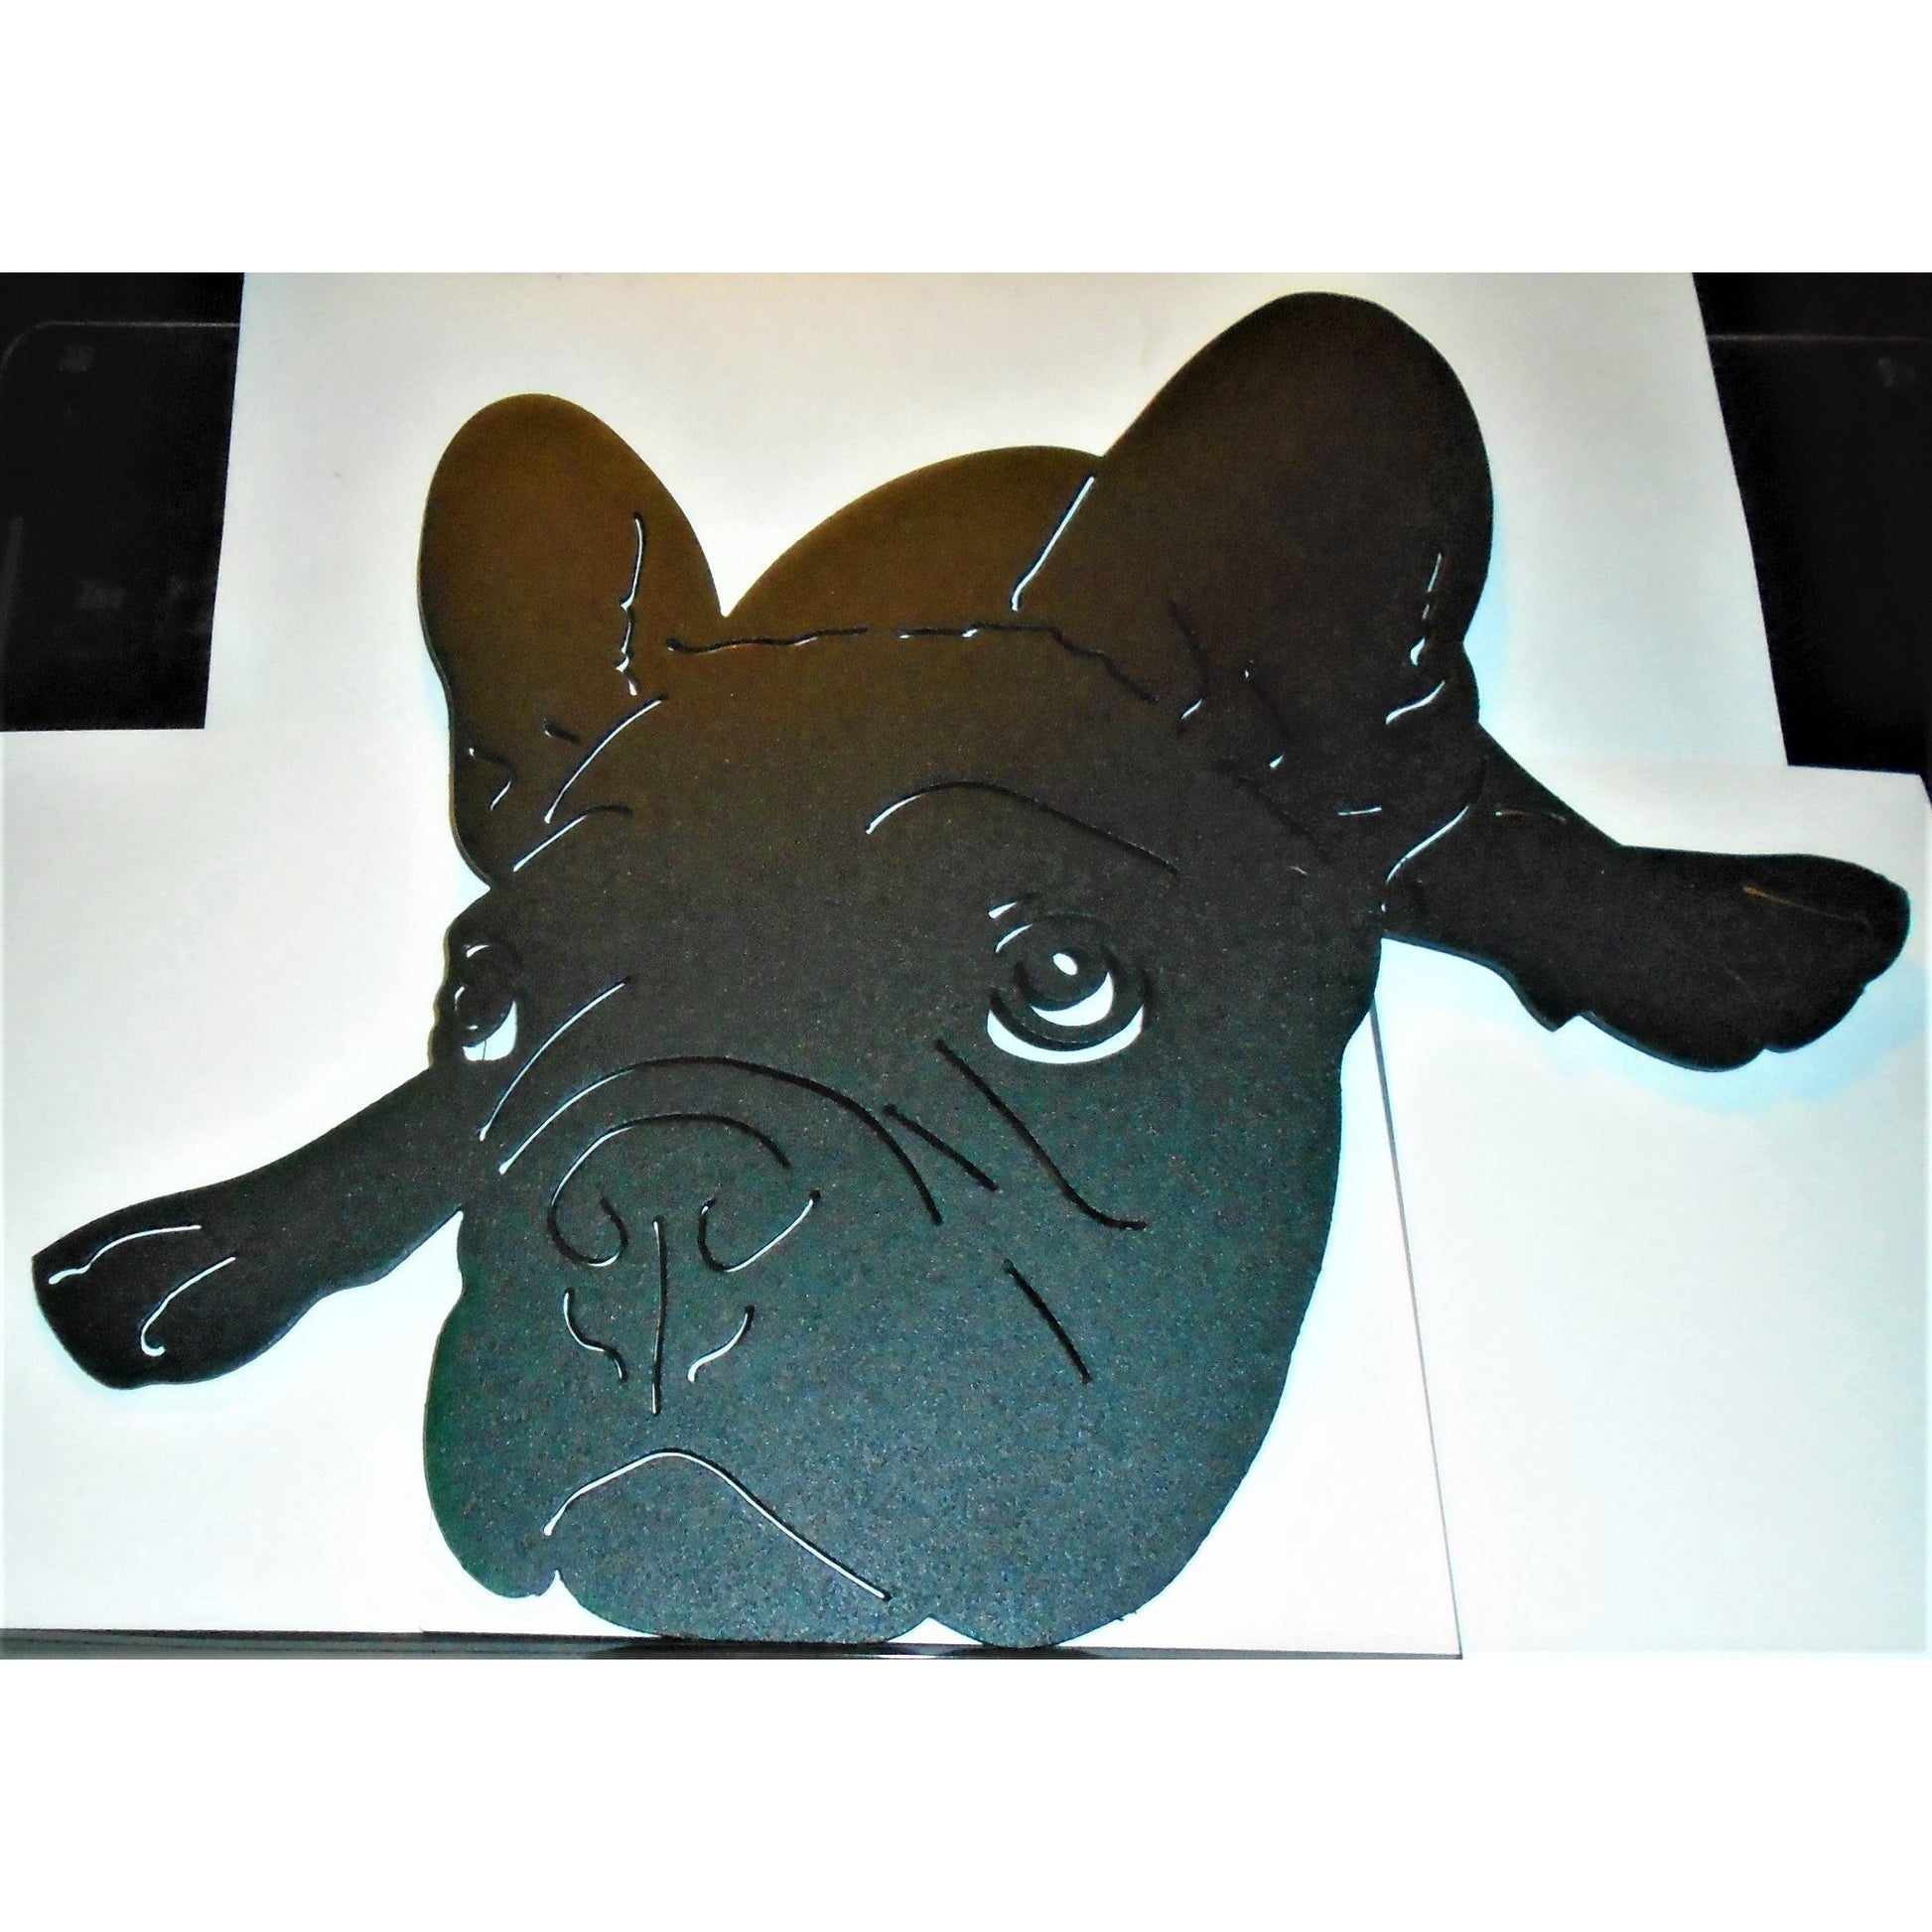 Dog Faces Drawings-DXF files Cut Ready for CNC-DXFforCNC.com